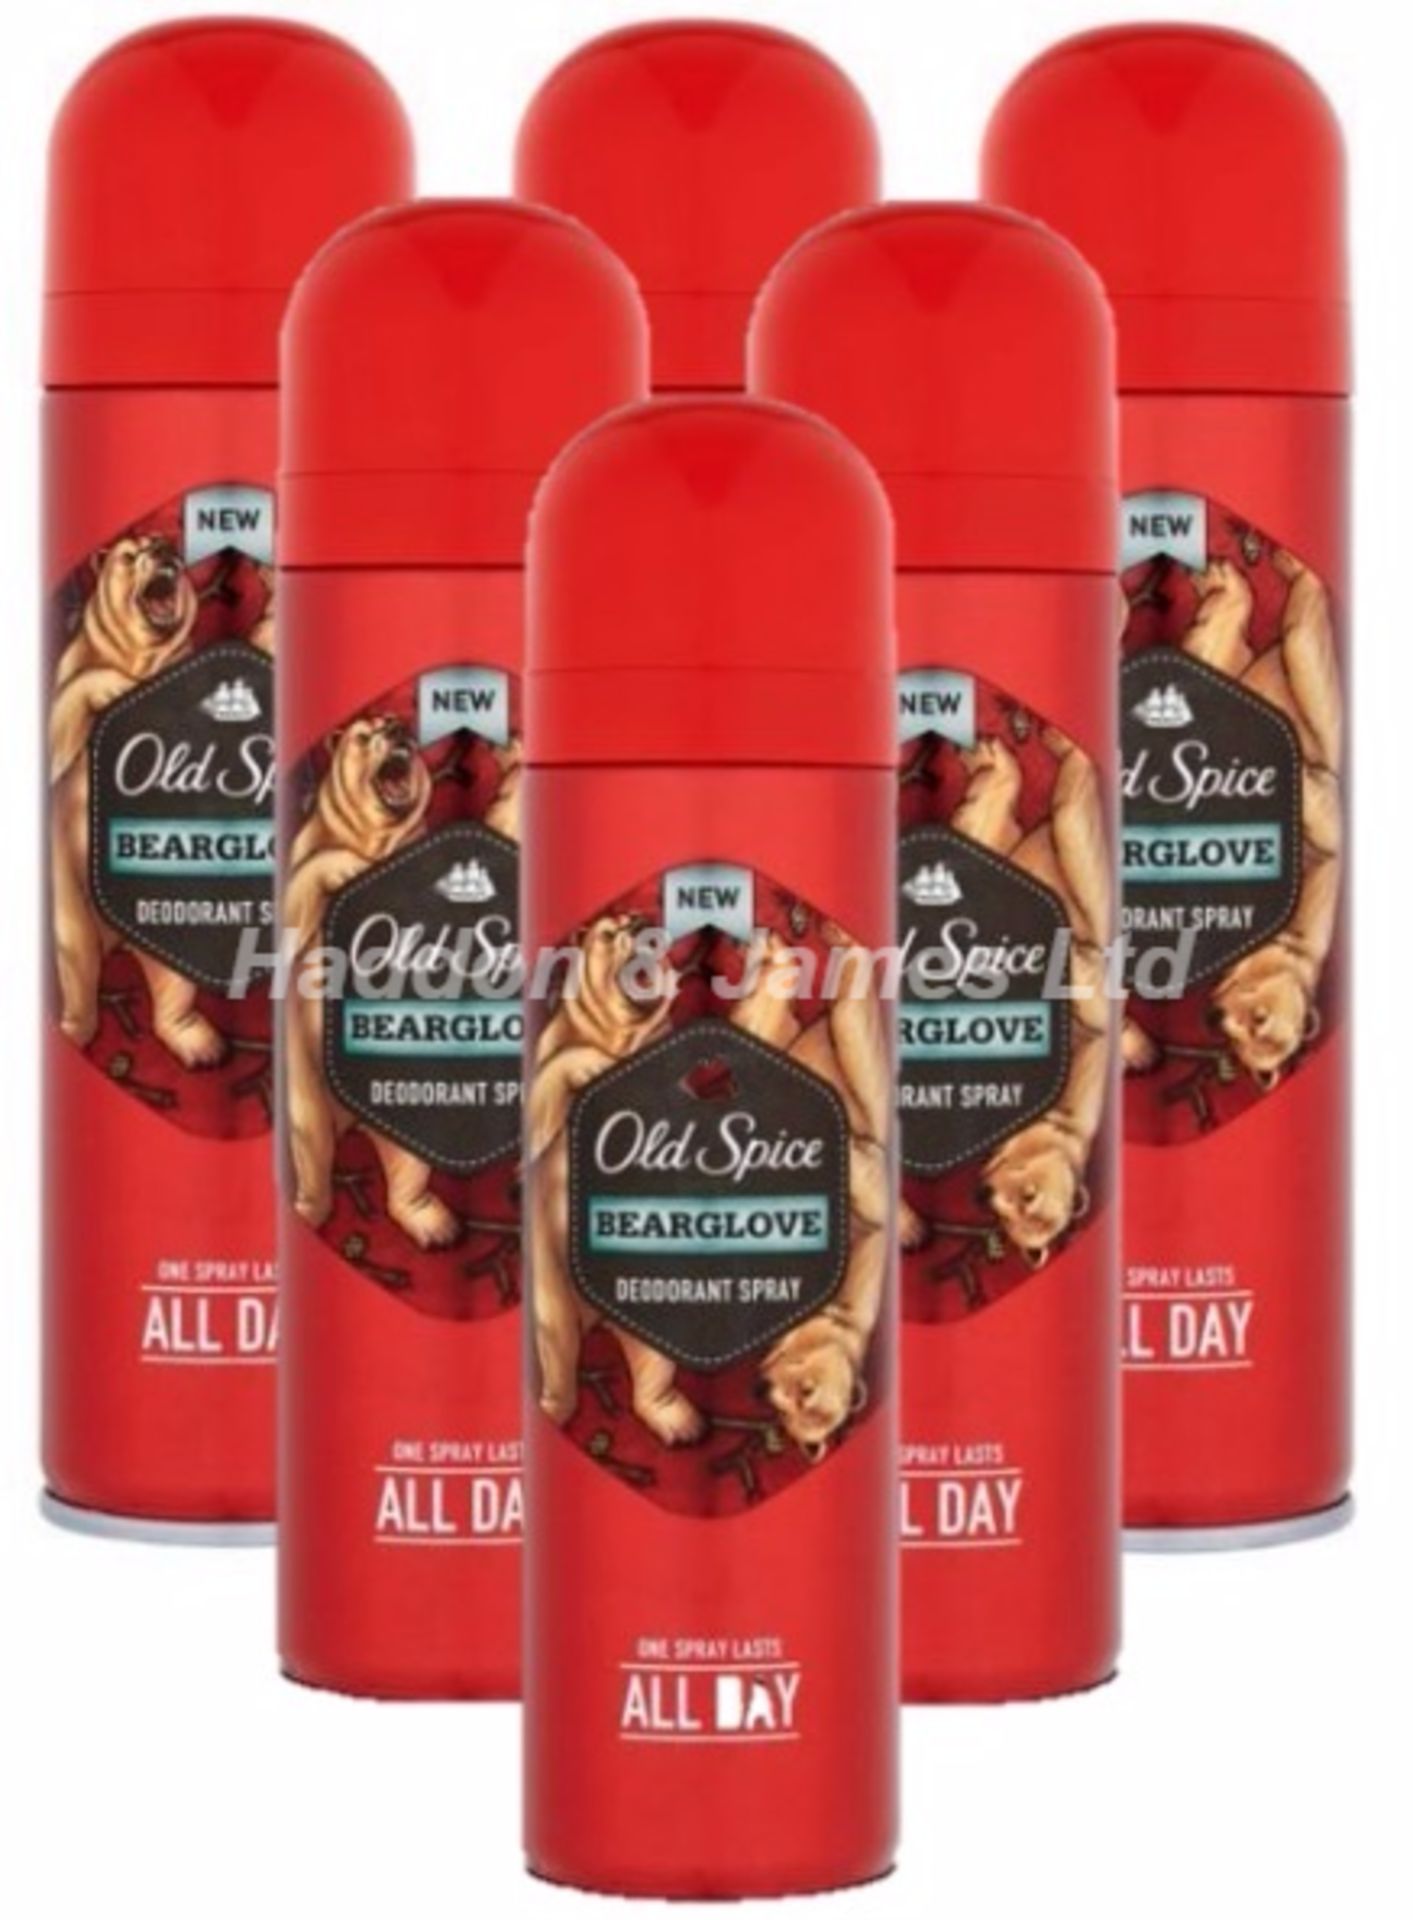 V Brand New 6 x Old Spice Deodorant Spray Bearglove 150ml ISP£17.94 (Amazon) (Item available after